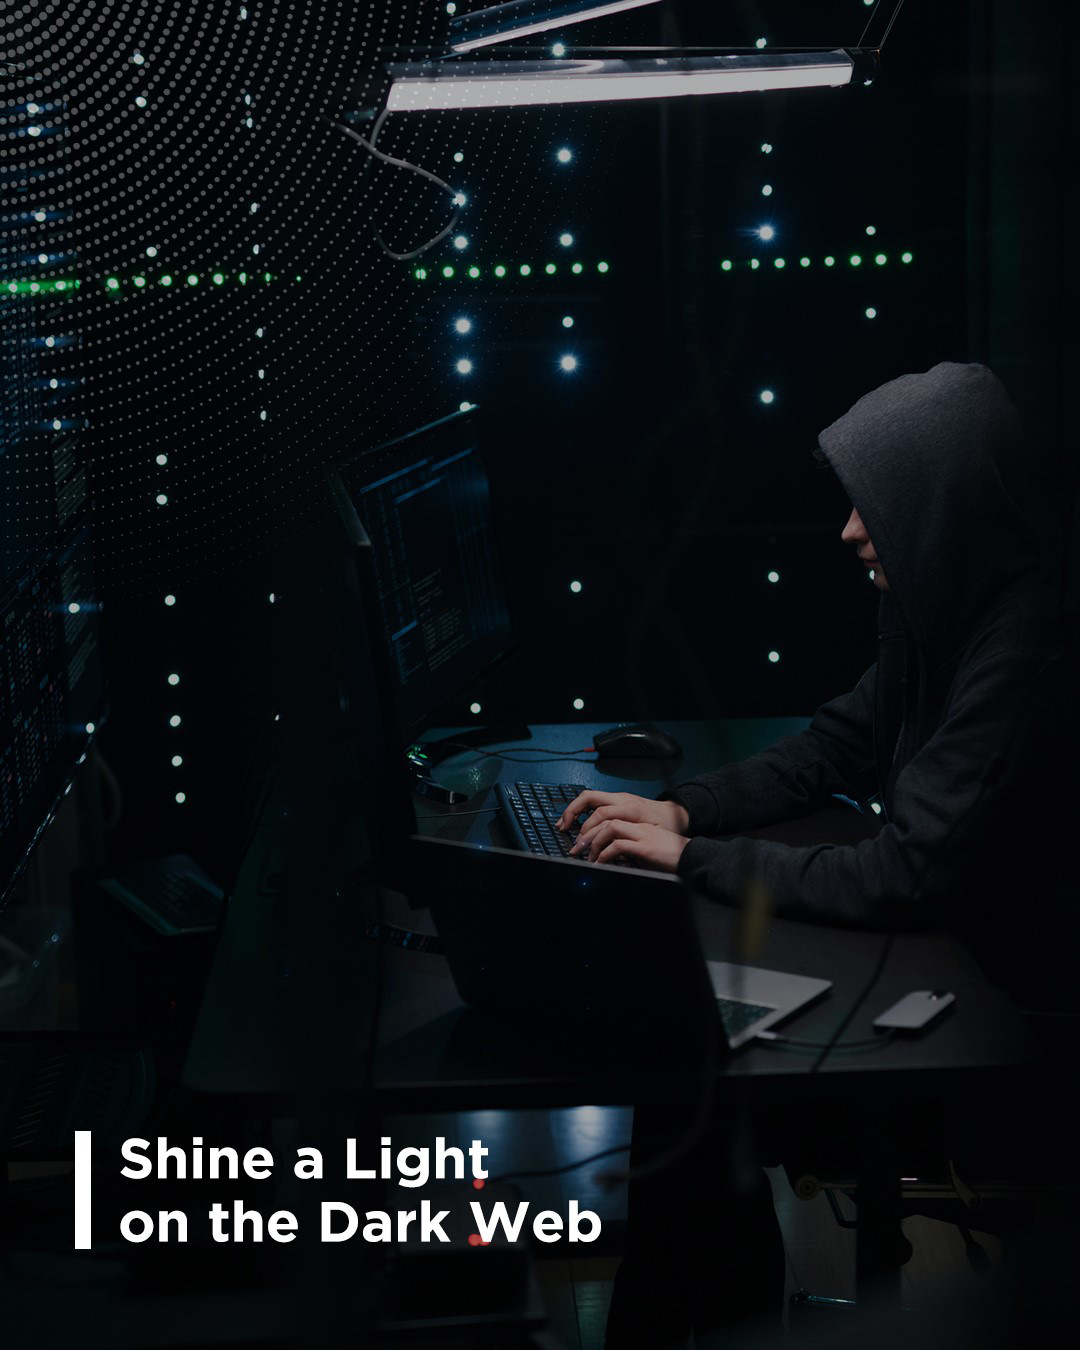 Shine a light on the Dark Web [Download Guide]